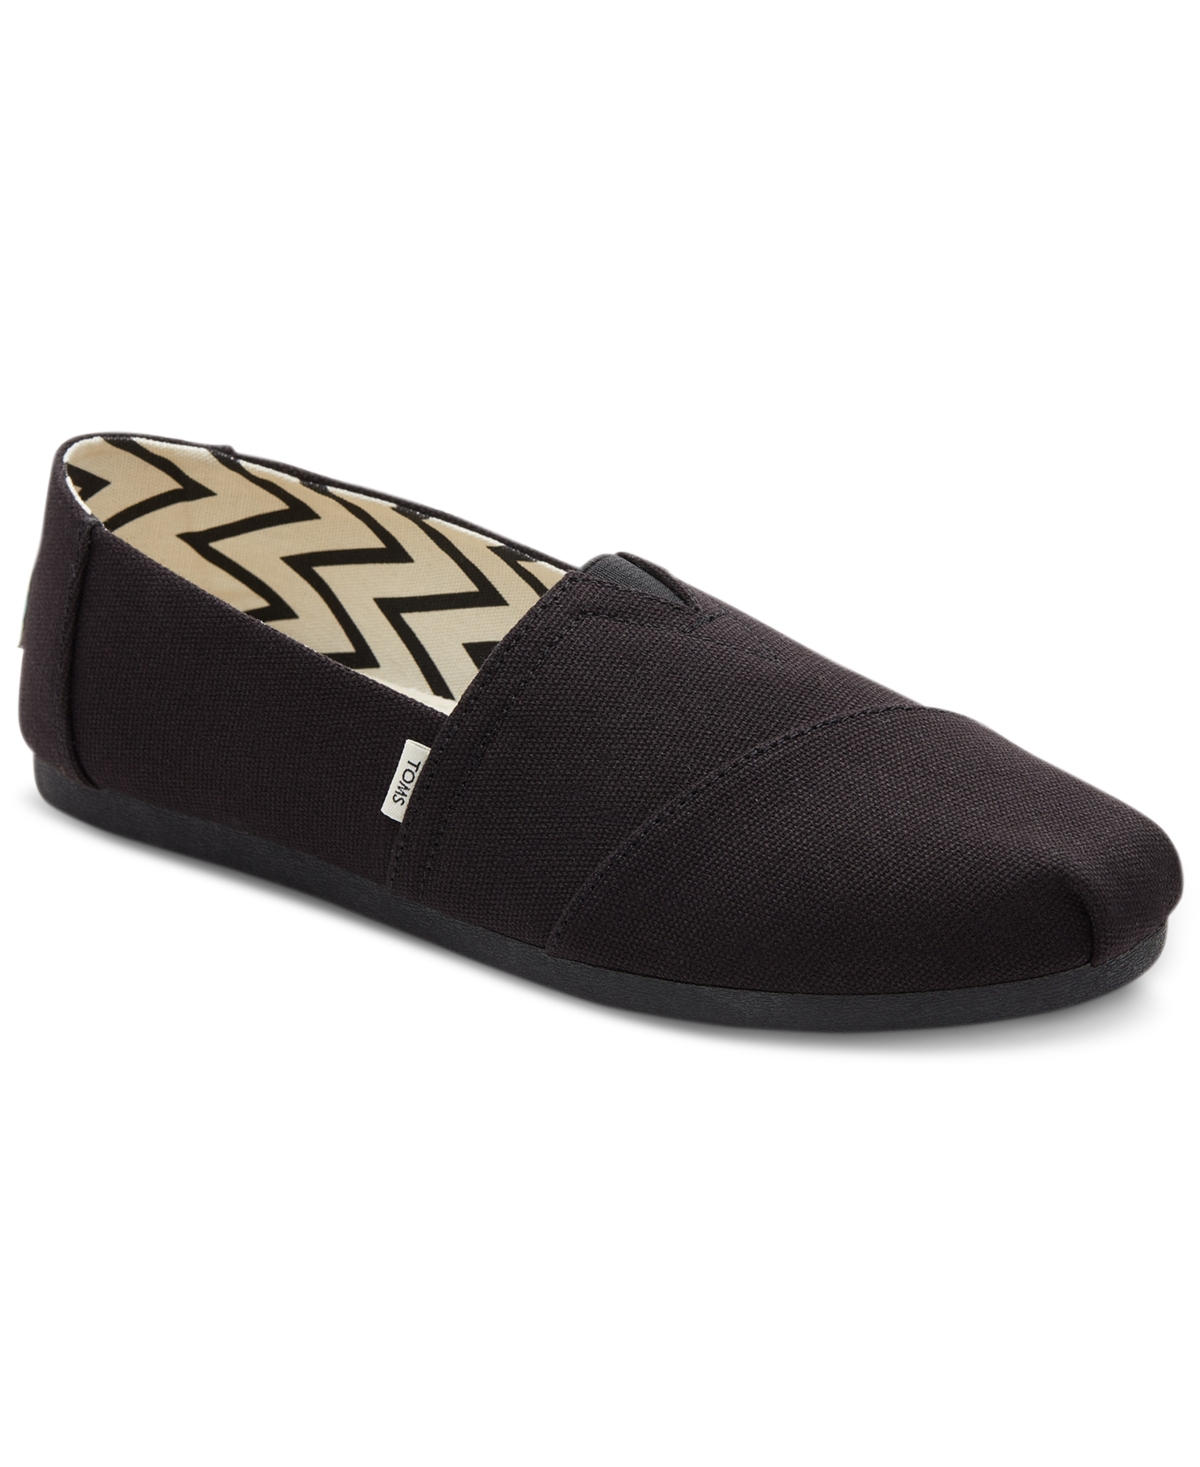 Toms Women's Alpargata Recycled Slip-on Flats In Black,black Recycled Canvas